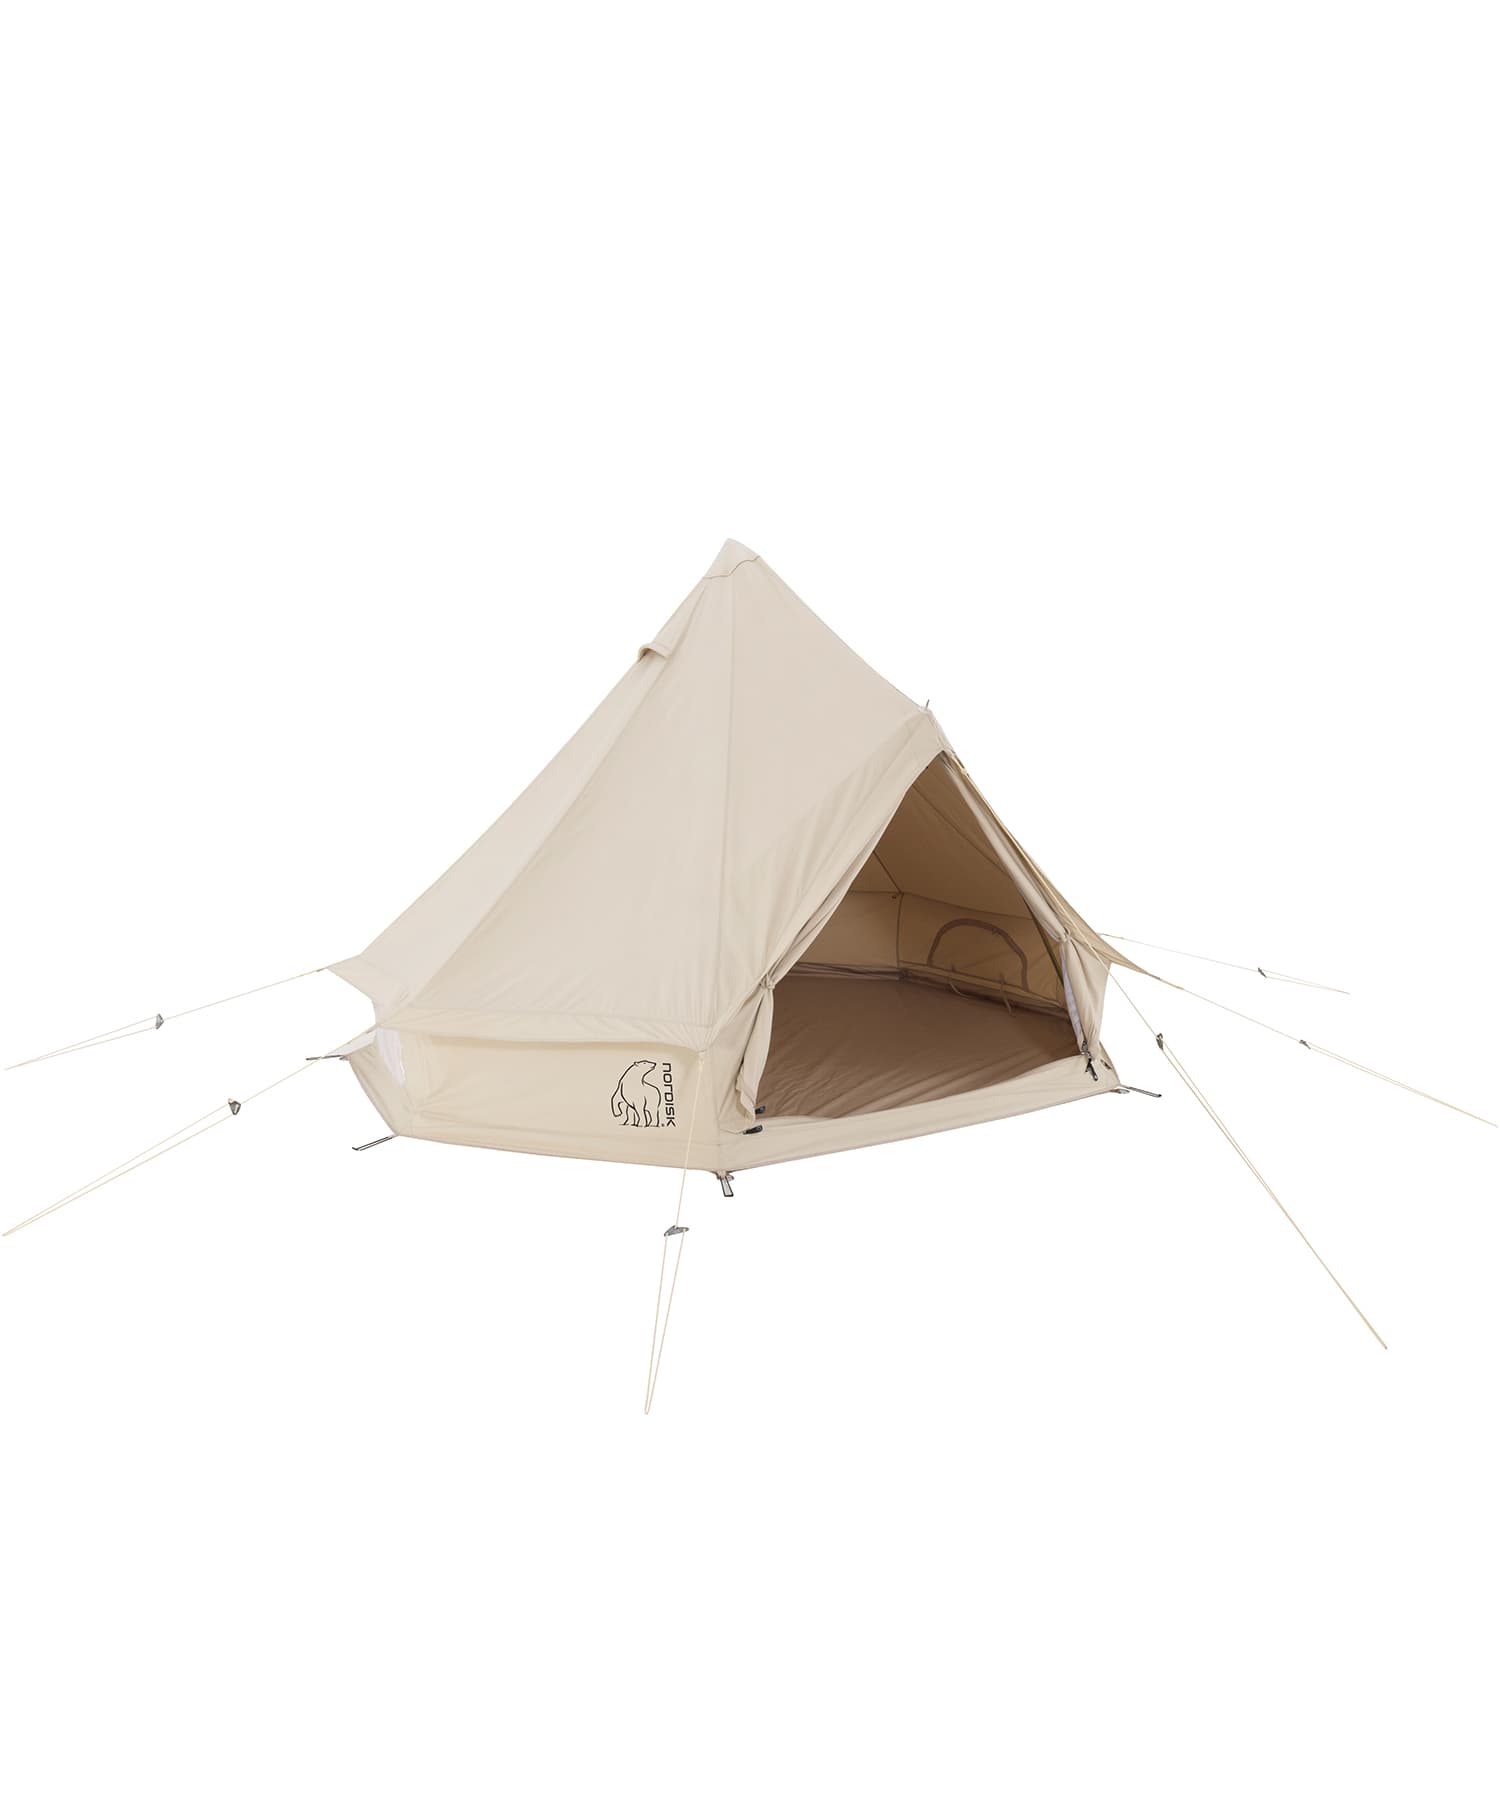 NORDISK ASGARD 7.1 TENT WITH SEWN-IN FLOOR / ノルディスク 